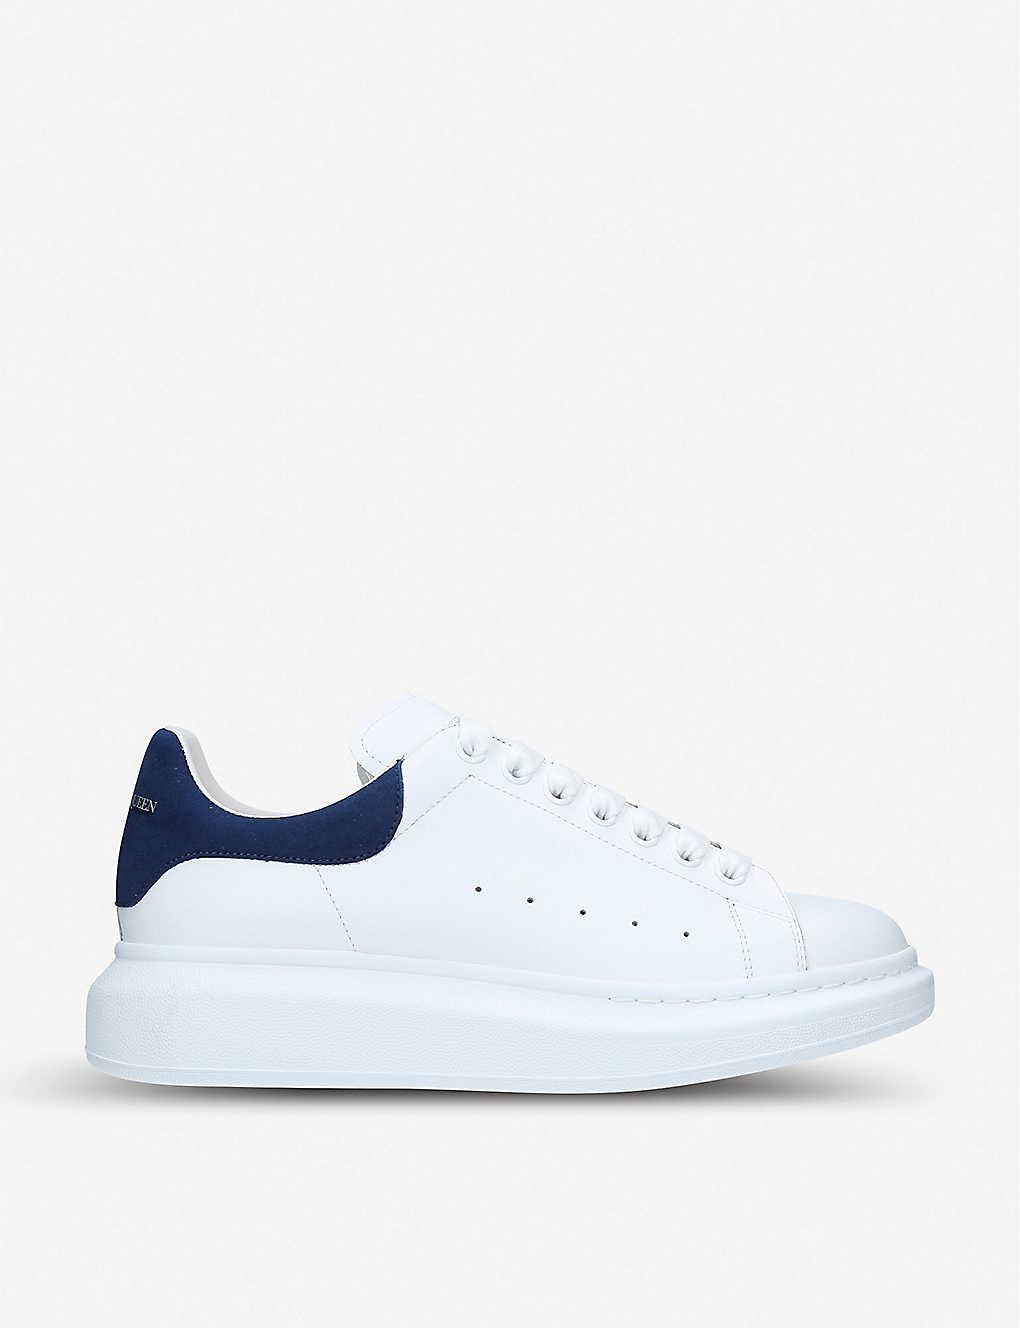 white platform trainers leather